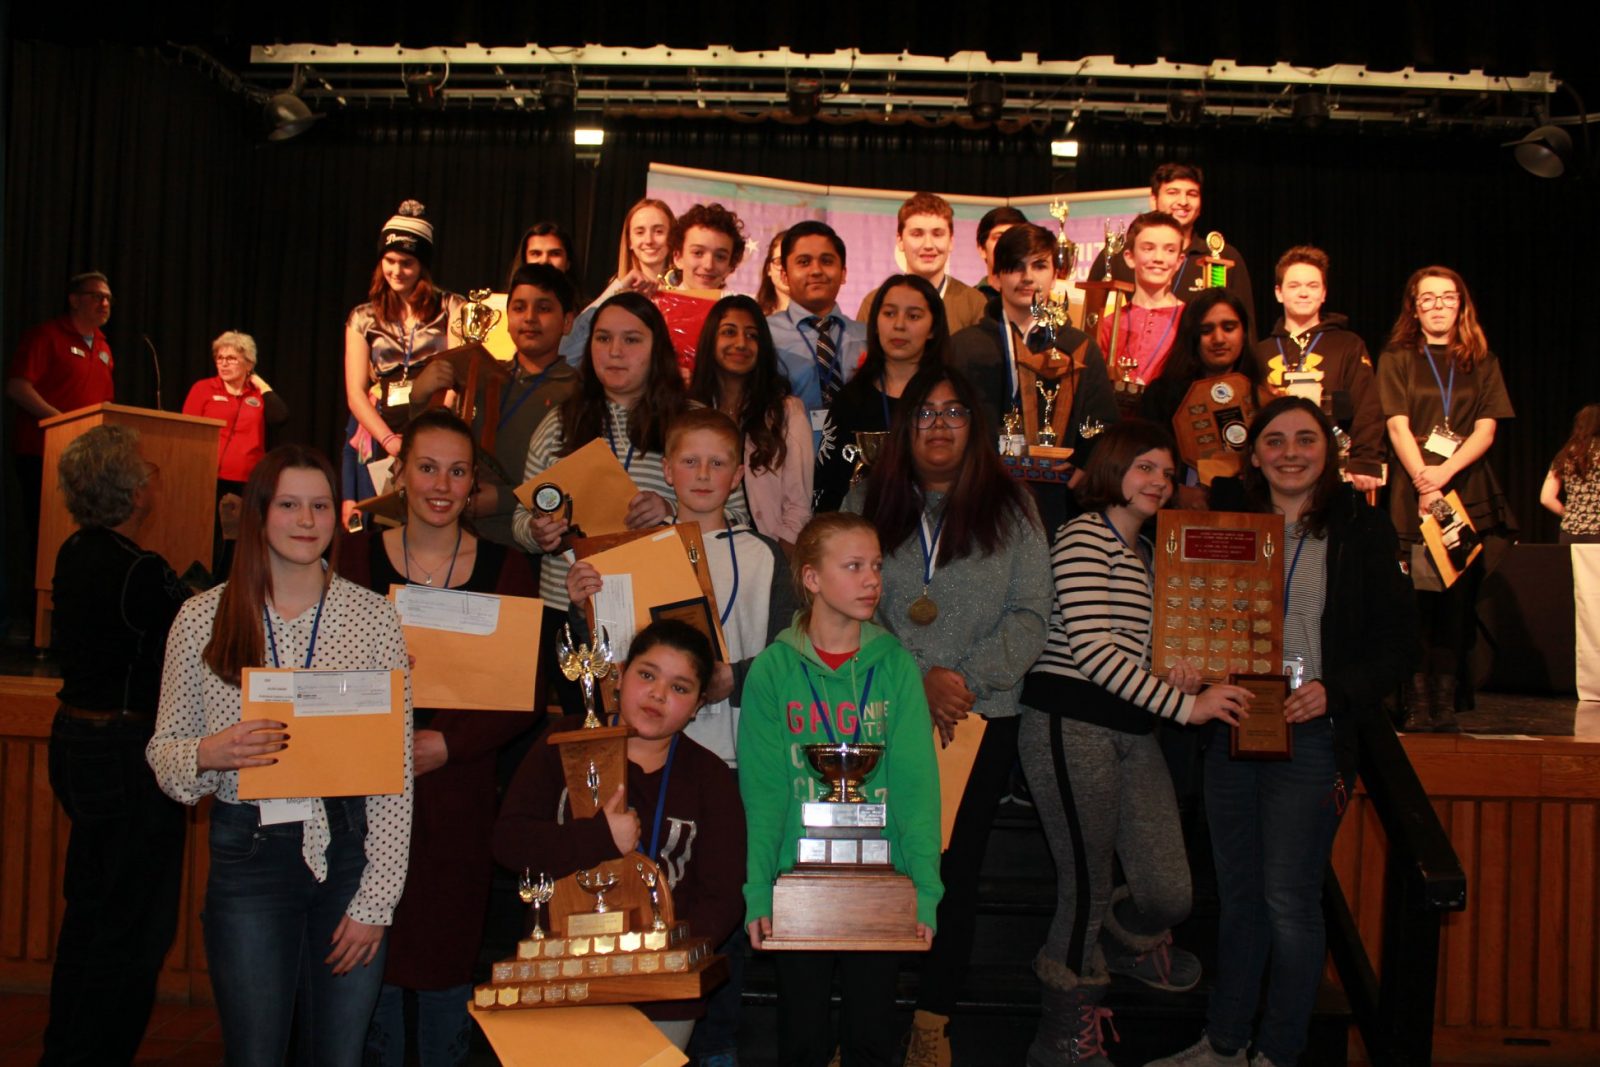 List of winners from 44th United Counties Science Fair